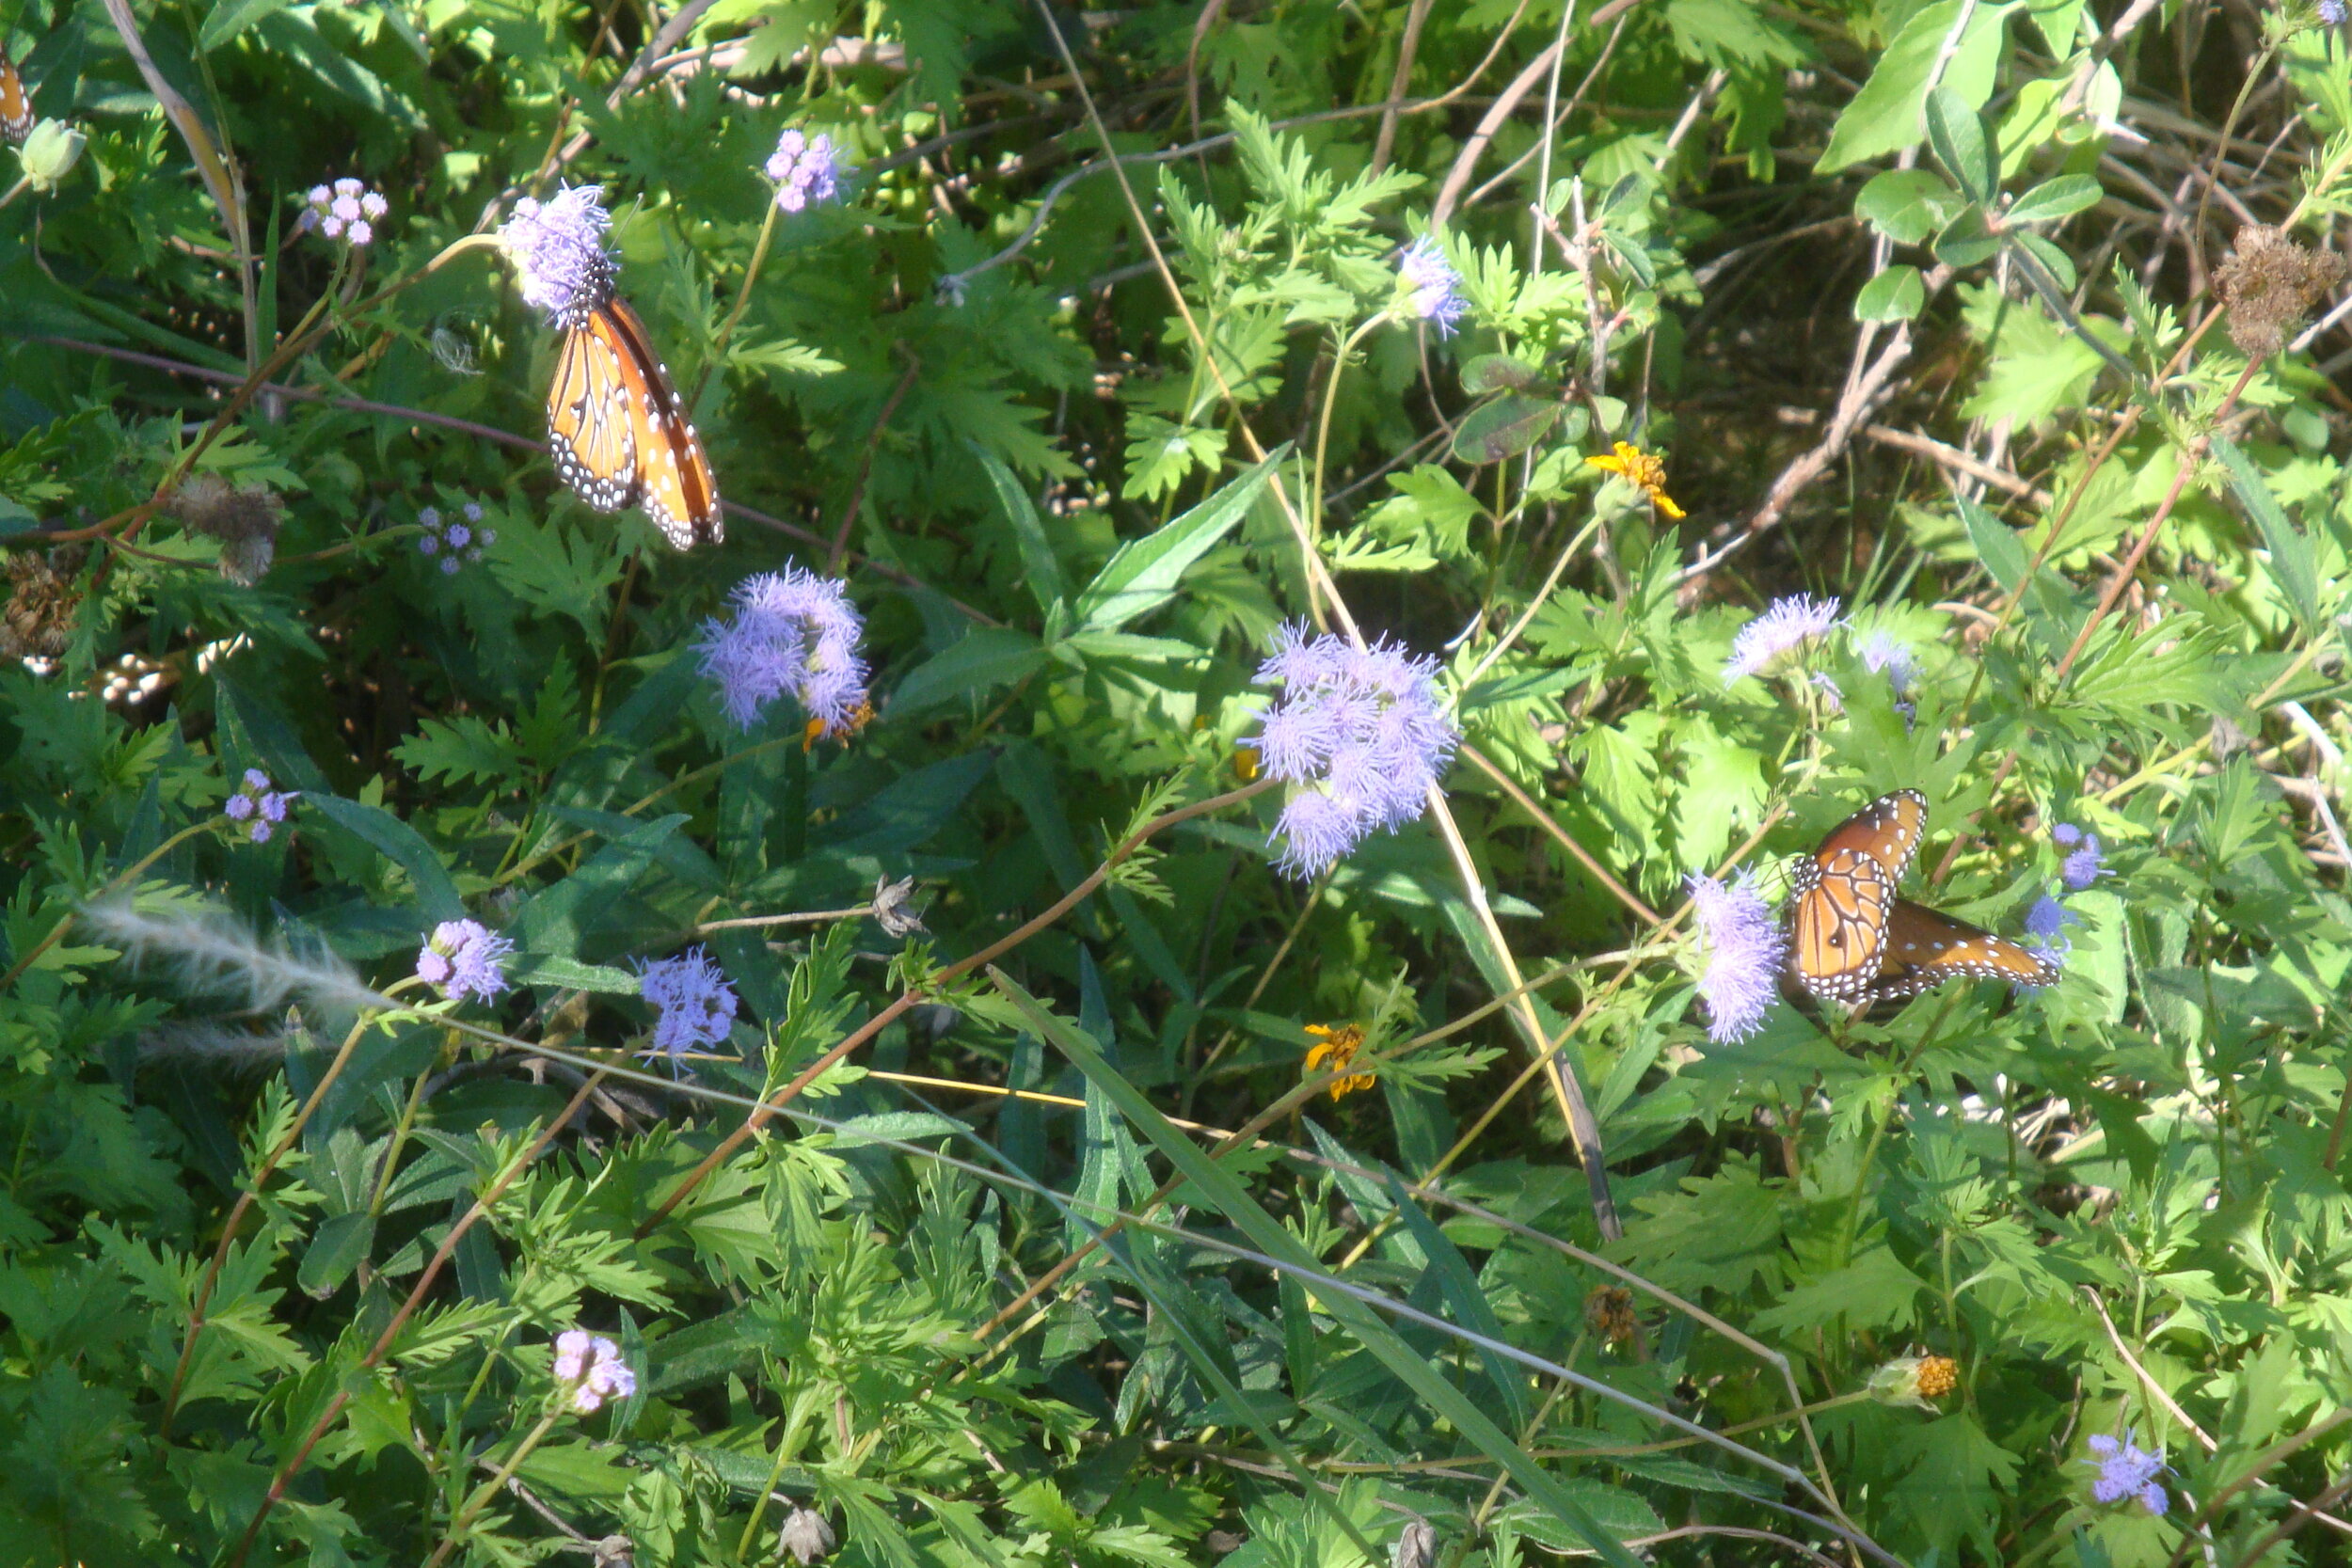  Monarchs and Queen butterflies love the nectar from Gregg’s Mistflower. Photo by Patsy Kuentz 